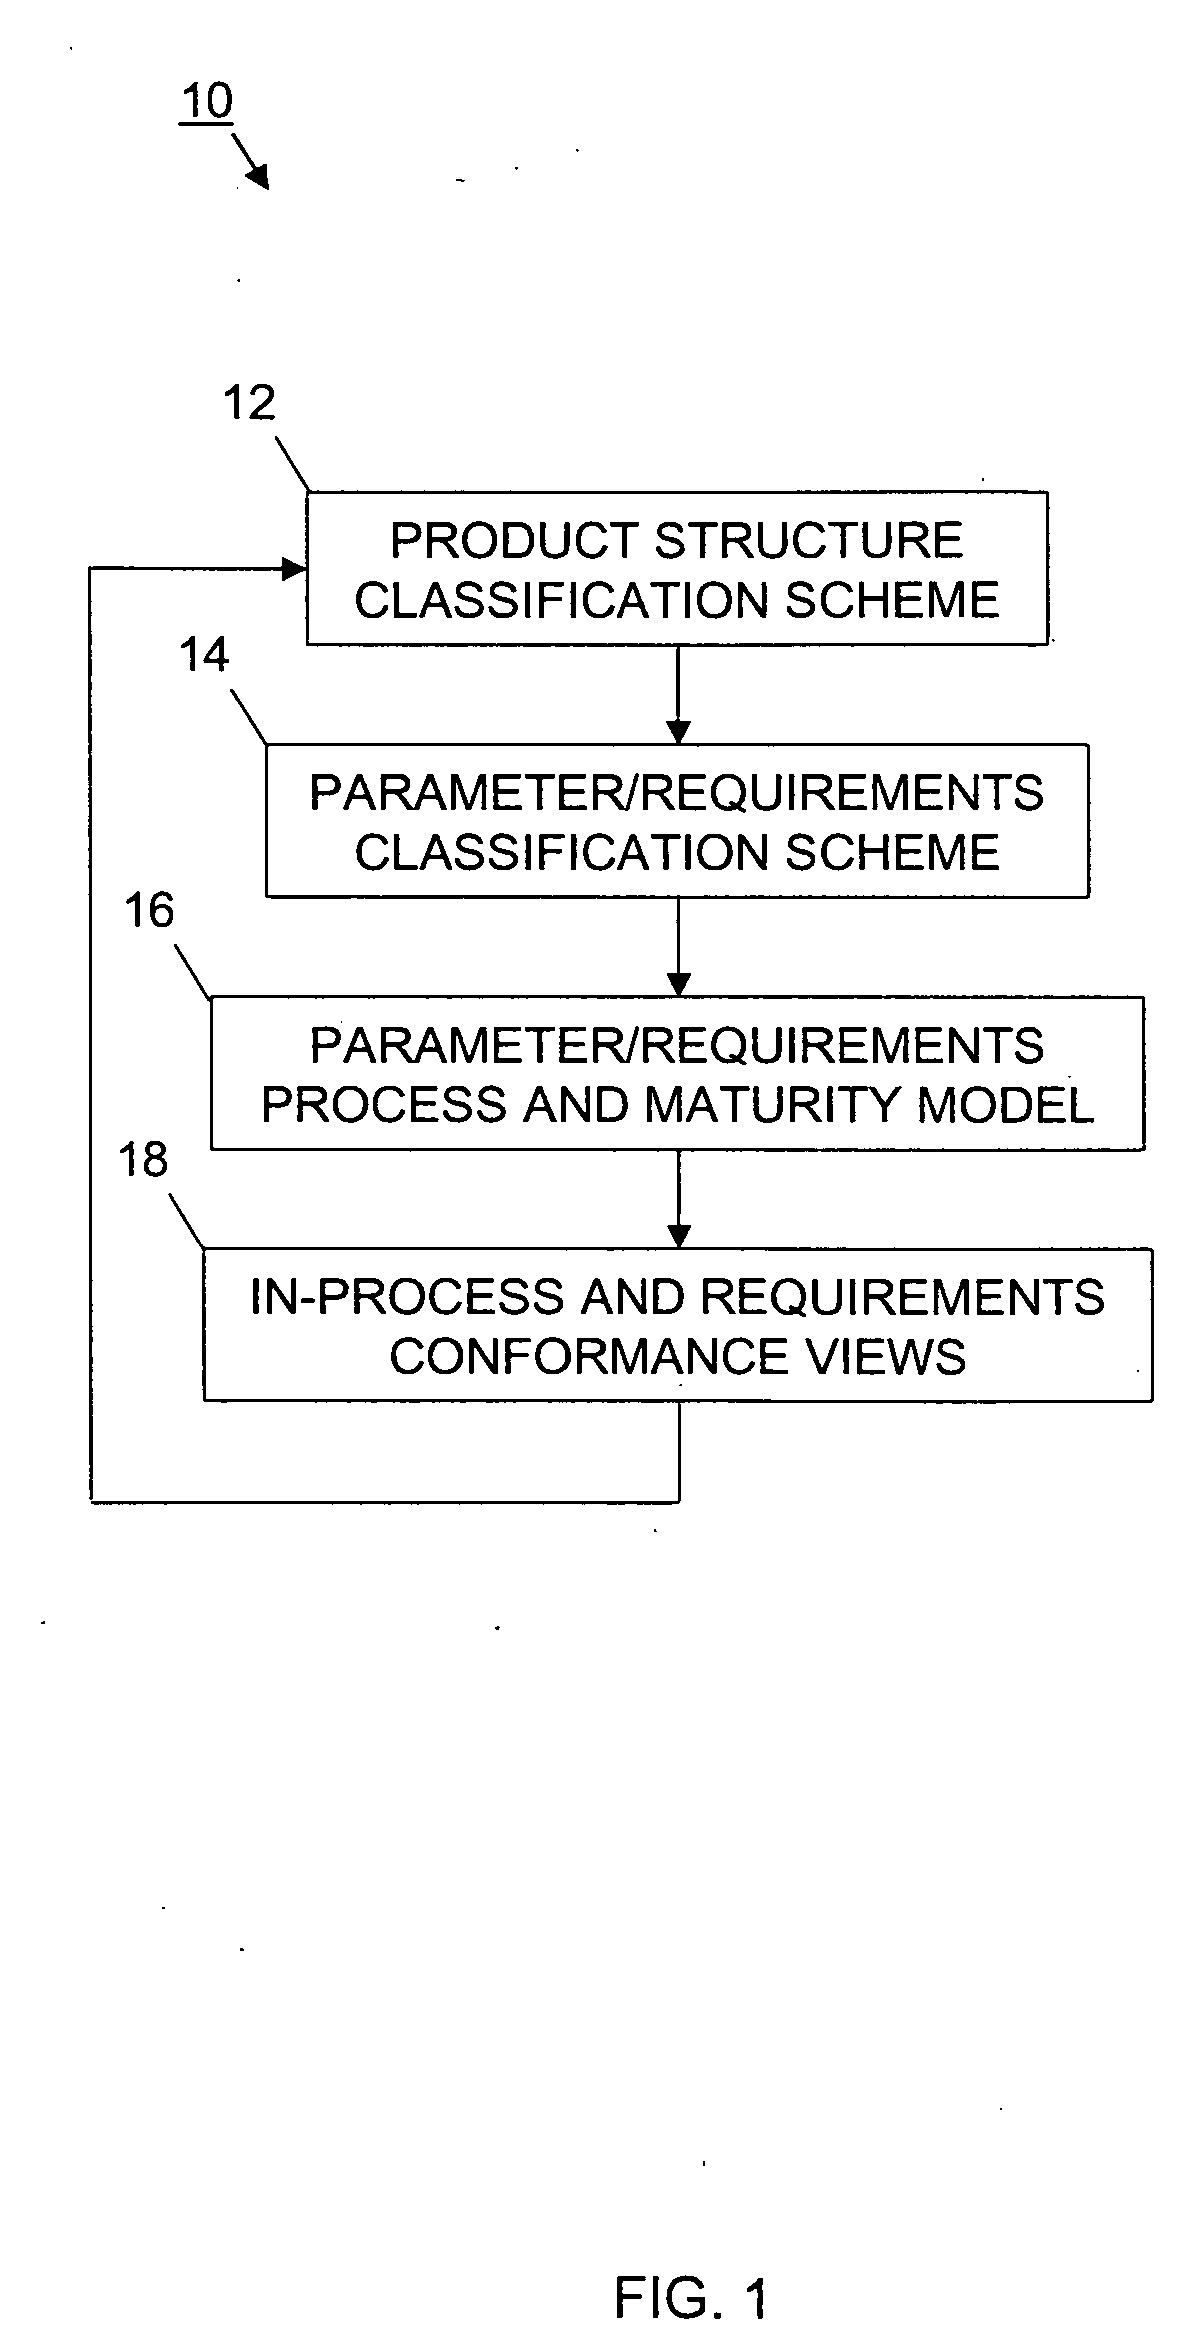 Critical parameter/requirements management process and environment